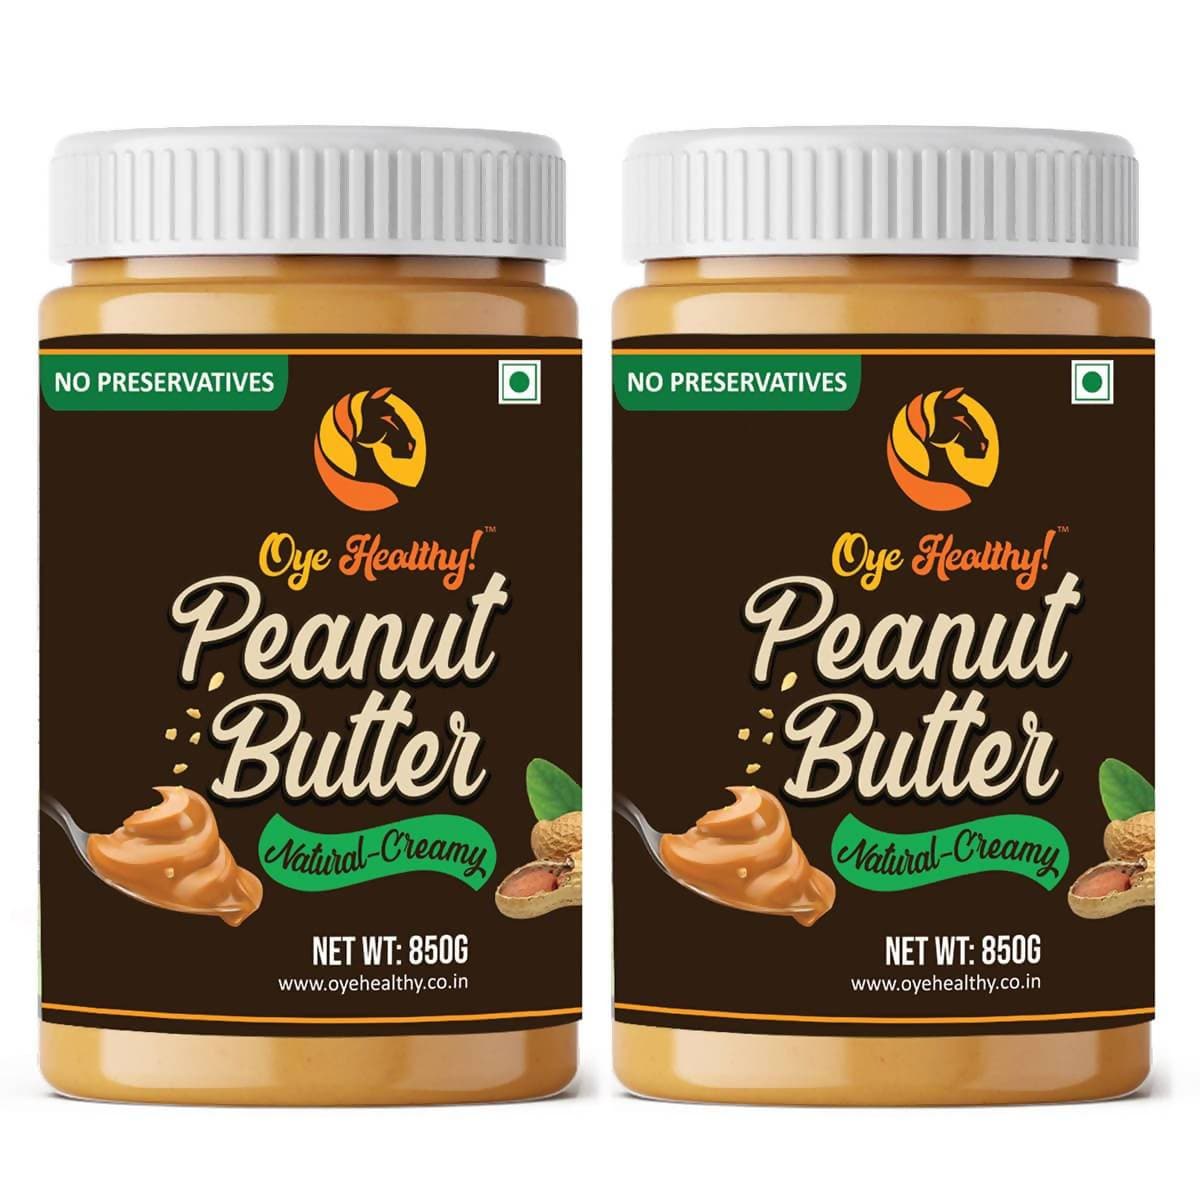 Oye Healthy Peanut Butter Natural Creamy